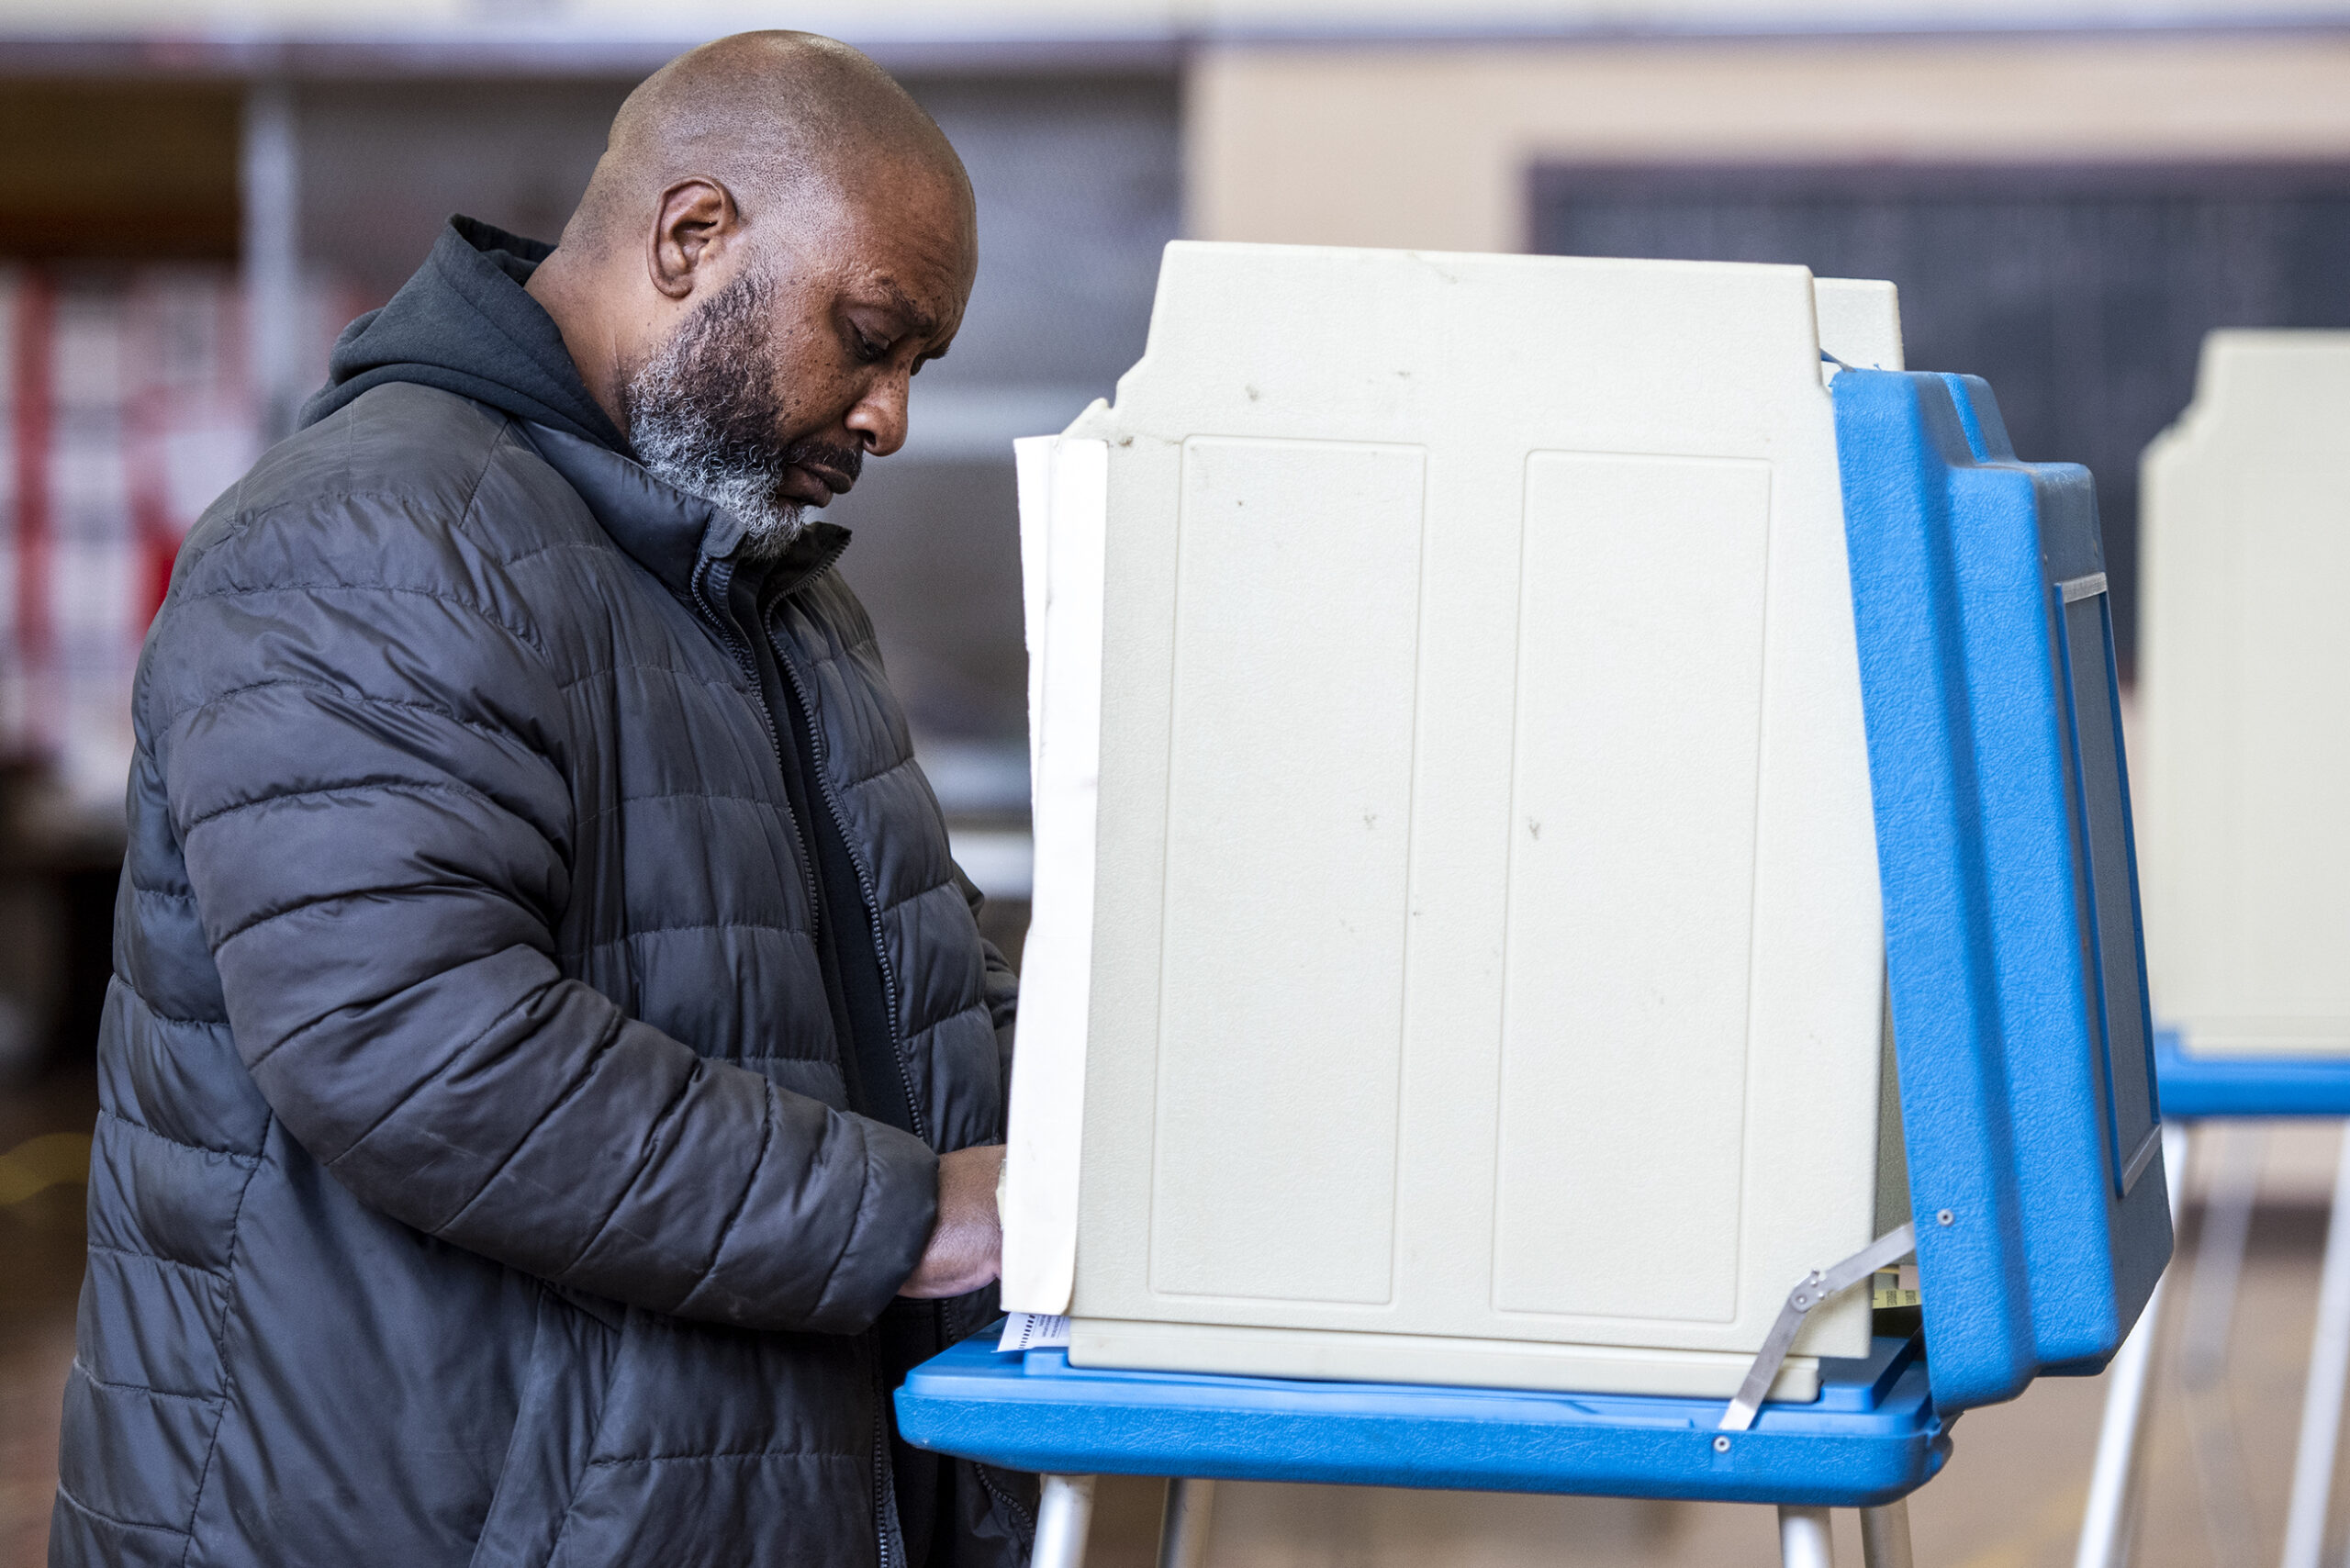 A voter in a jacket fills out a ballot at a voting booth.